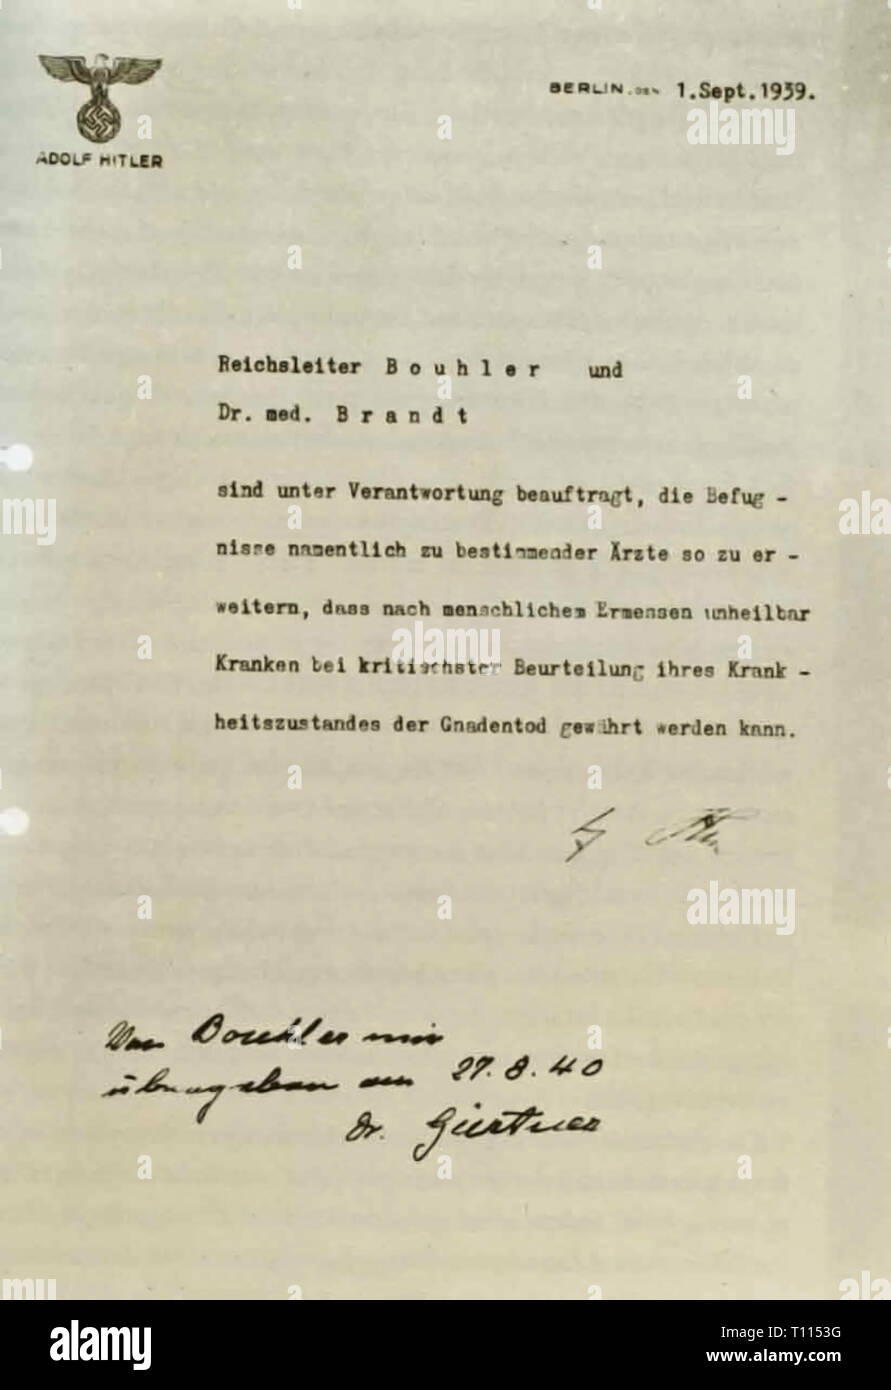 Nazism / National Socialism, documents, commissioning of Philipp Bouhler and Karl Brandt with the execution of the killing of mentally or physically handicapped people by Adolf Hitler, Berlin, 1.9.1939, Germany, Third Reich, Second World War / WWII, serious crime, euthanasia, mercy killing, eugenics, Action T4, assassination, mass murder, mass murders, mass killings, medicine, medicines, sick person, sick people, disease, diseases, handicapped person, disabled person, handicapped people, assignment, assignments, command, order, commands, orders, , Additional-Rights-Clearance-Info-Not-Available Stock Photo